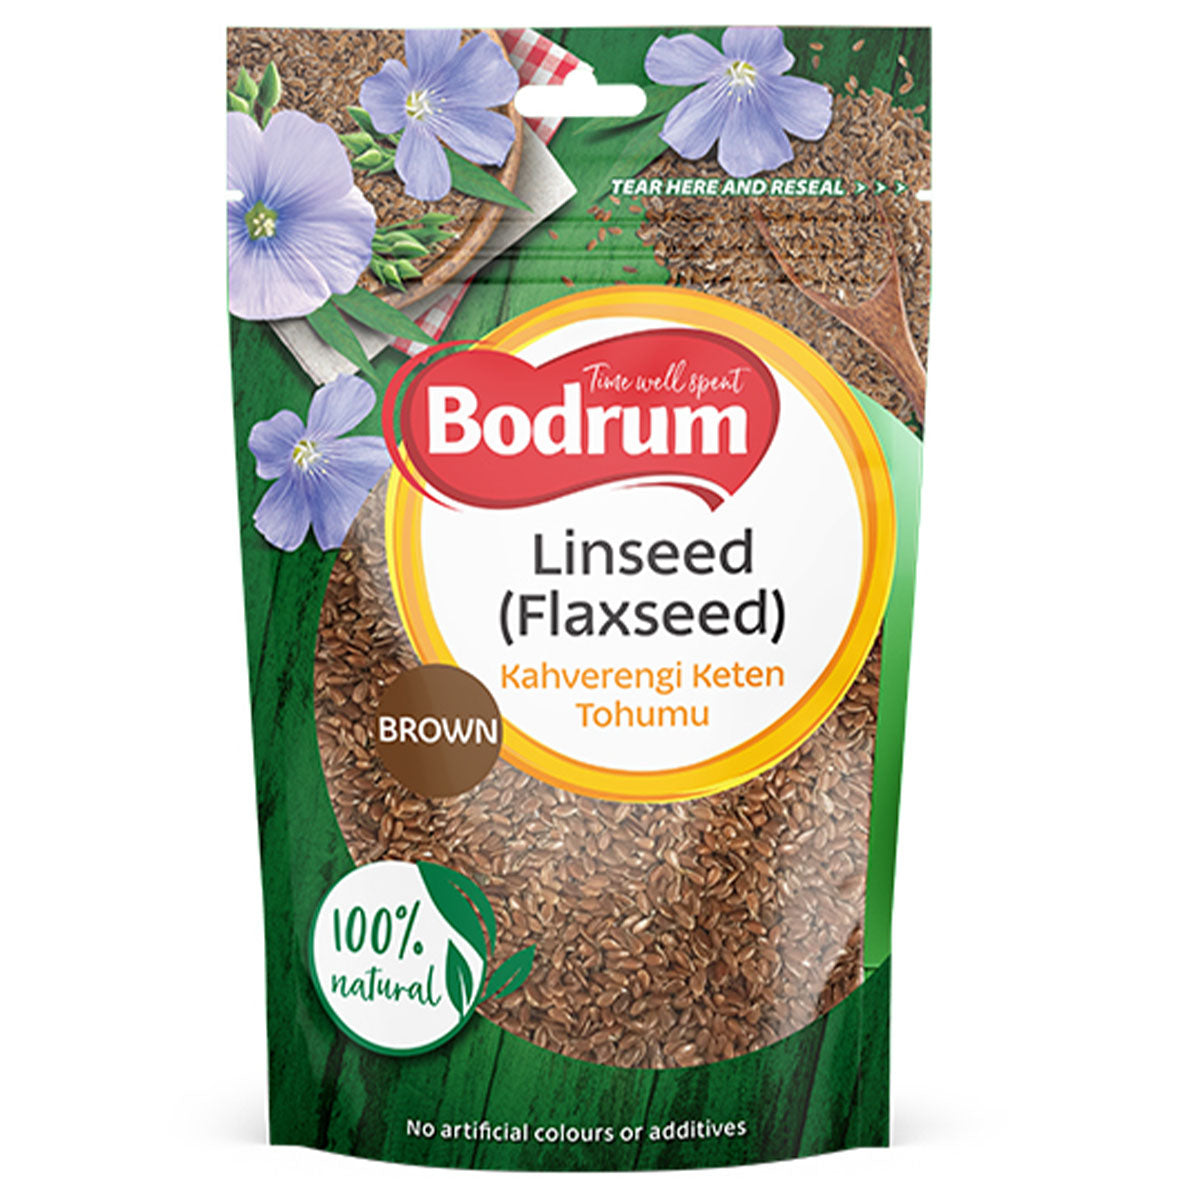 Bodrum - Brown Linseed - 100g - Continental Food Store